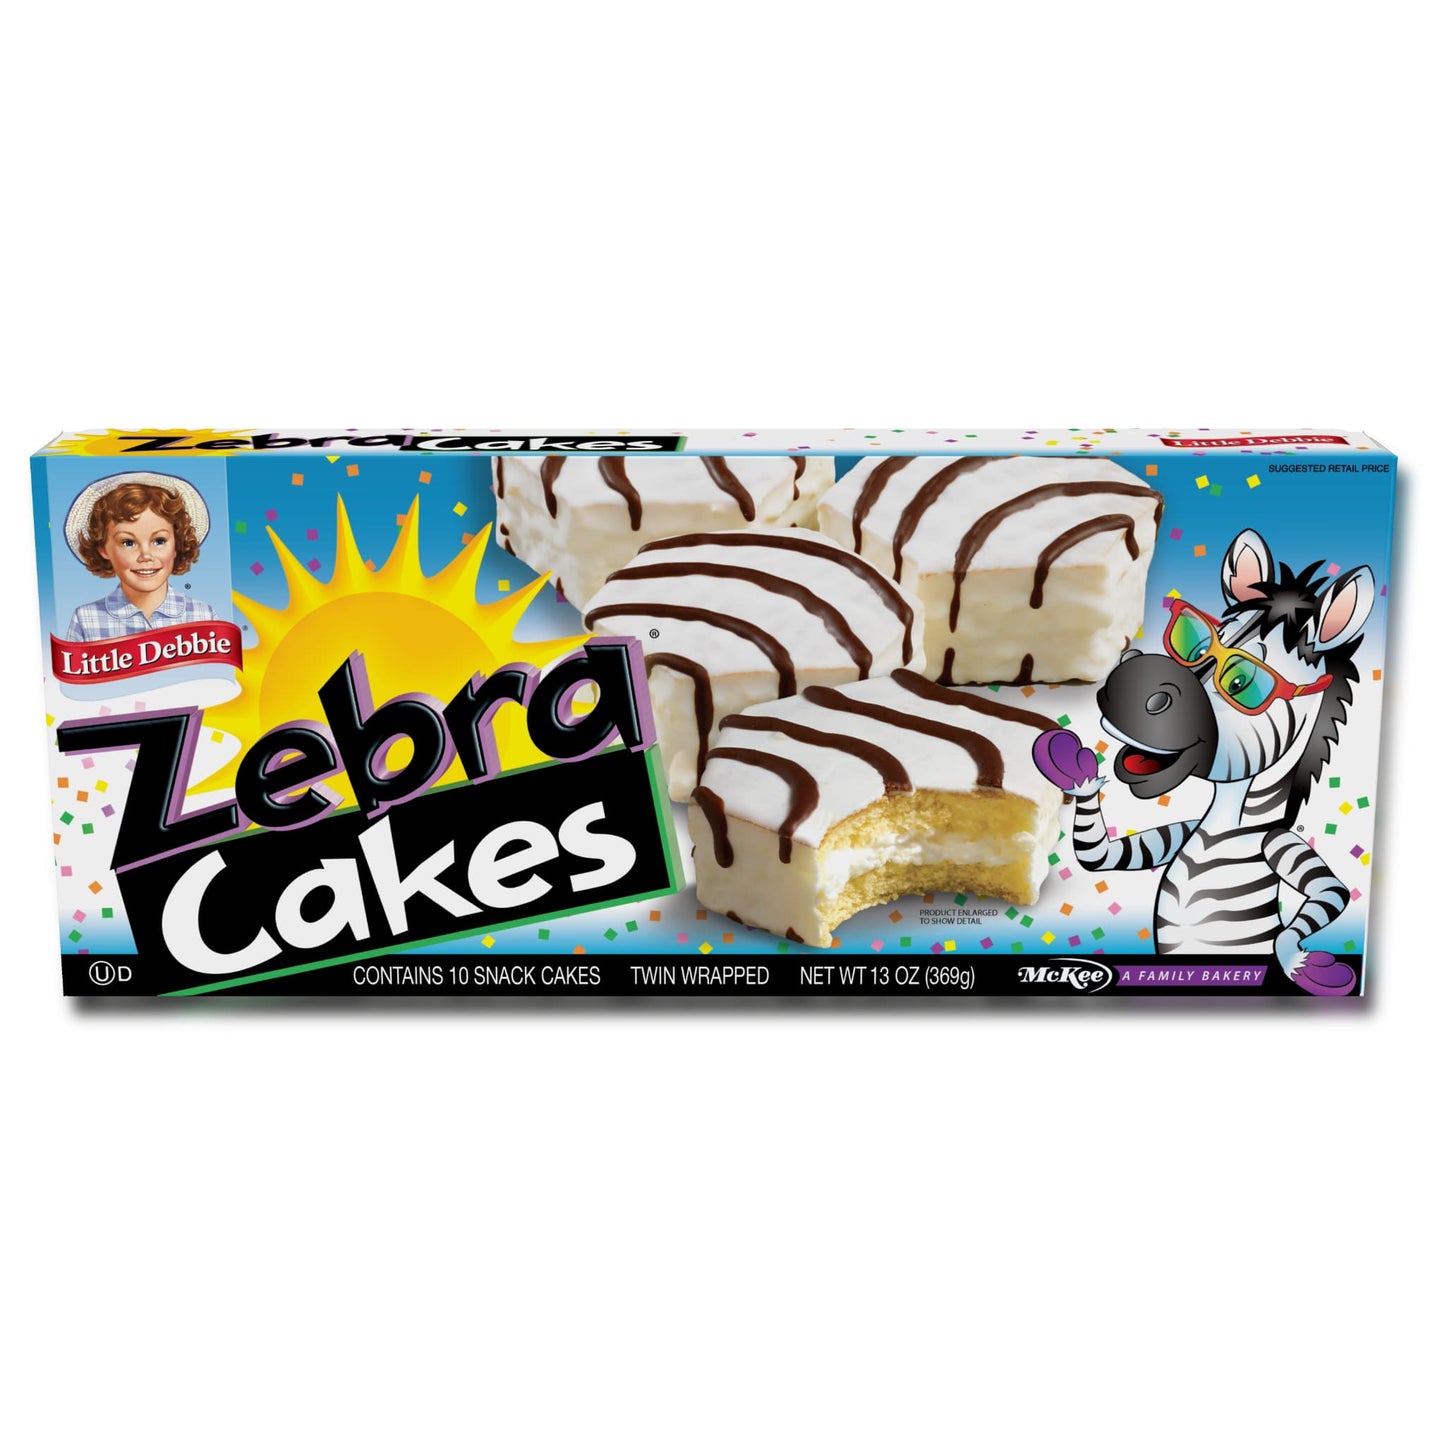 Colorful box of Little Debbie Zebra Cakes featuring vibrant graphics. The packaging displays a cartoon zebra, alongside images of the snack cakes which are white with chocolate stripes. The box includes a logo of Little Debbie and mentions that it contains 10 snack cakes, twin wrapped, with a net weight of 13 oz (369g).